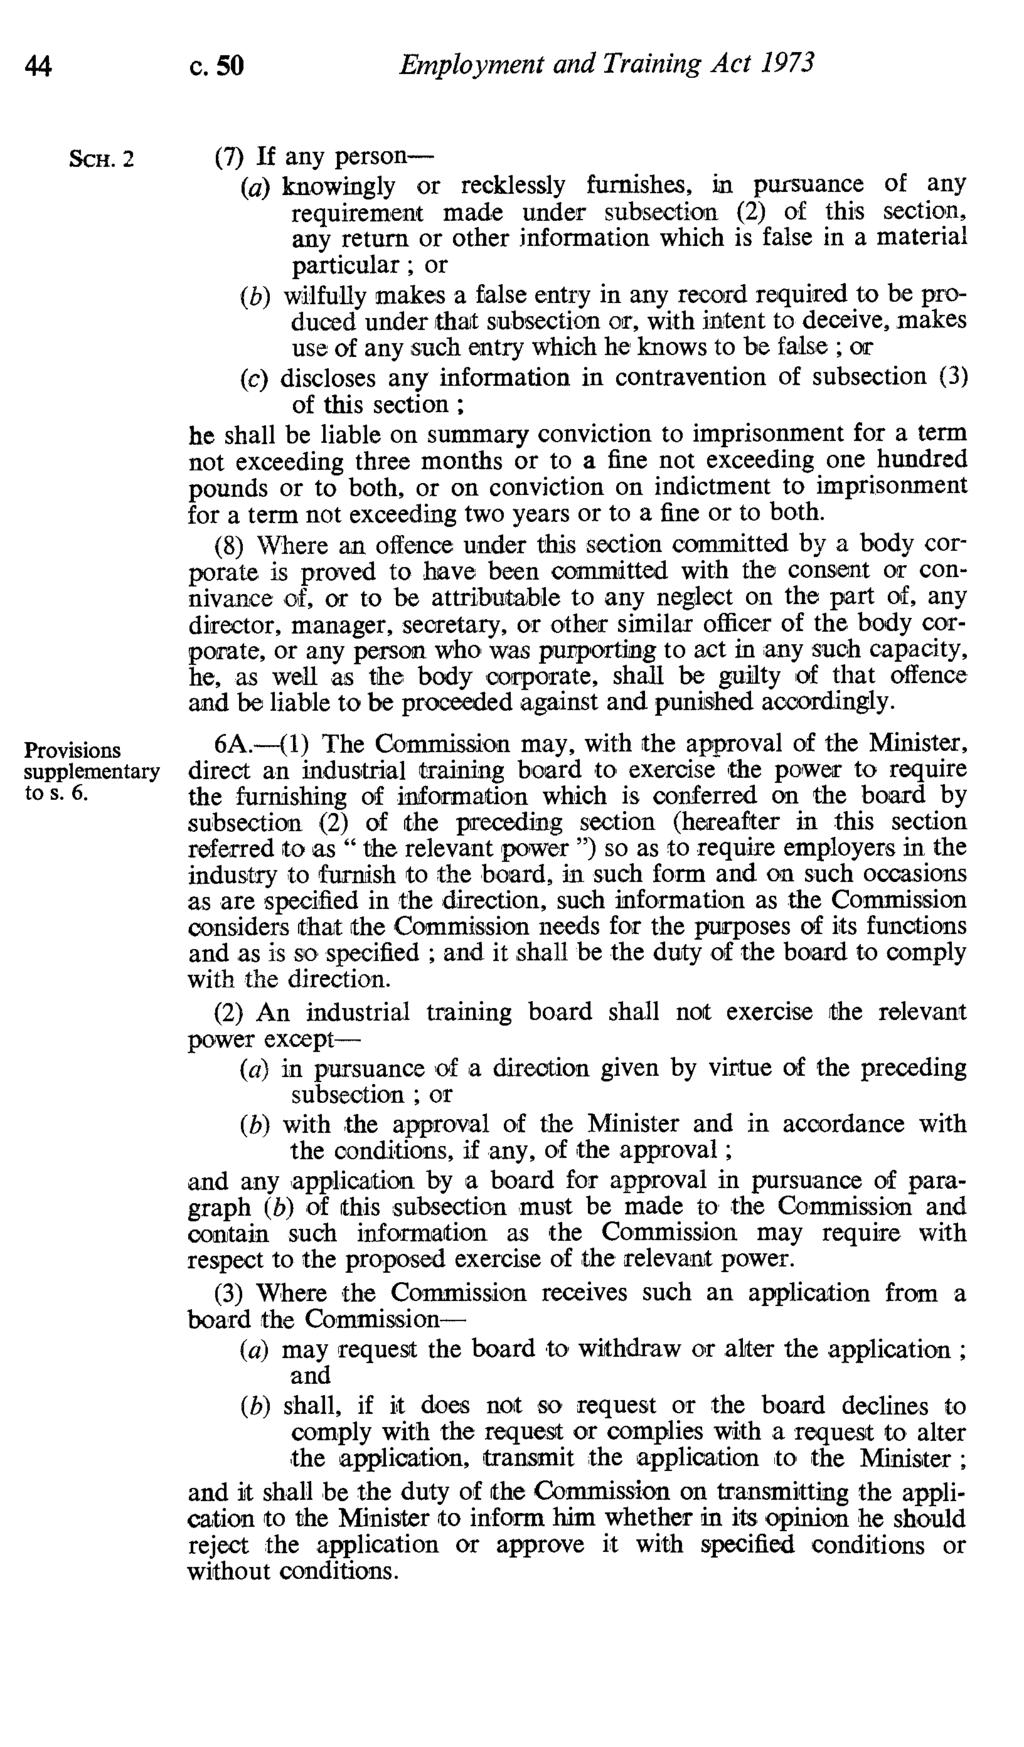 44 c. 50 Employment and Training Act 1973 SCH. 2 Provisions supplementary to s. 6.